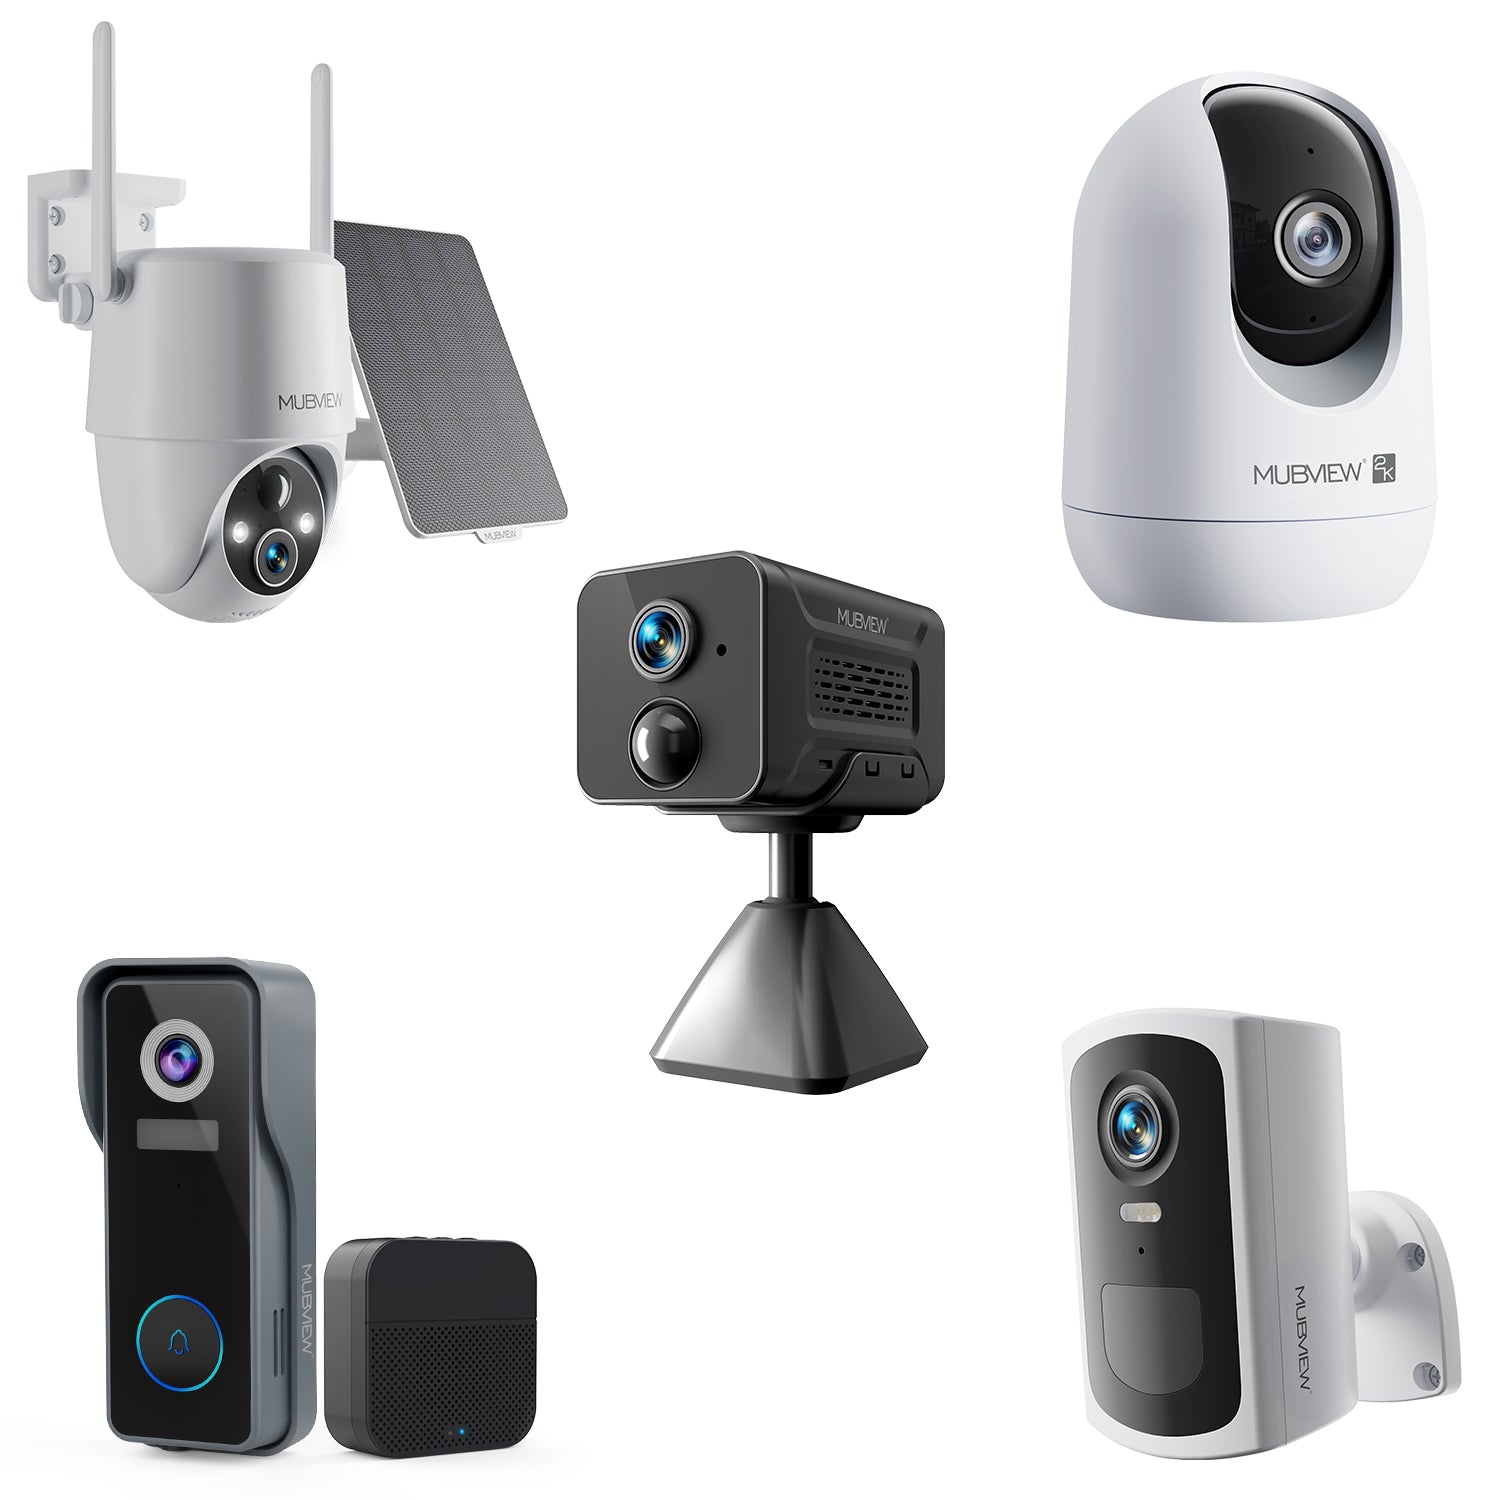 🔥MUBVIEW Home Security Camera System